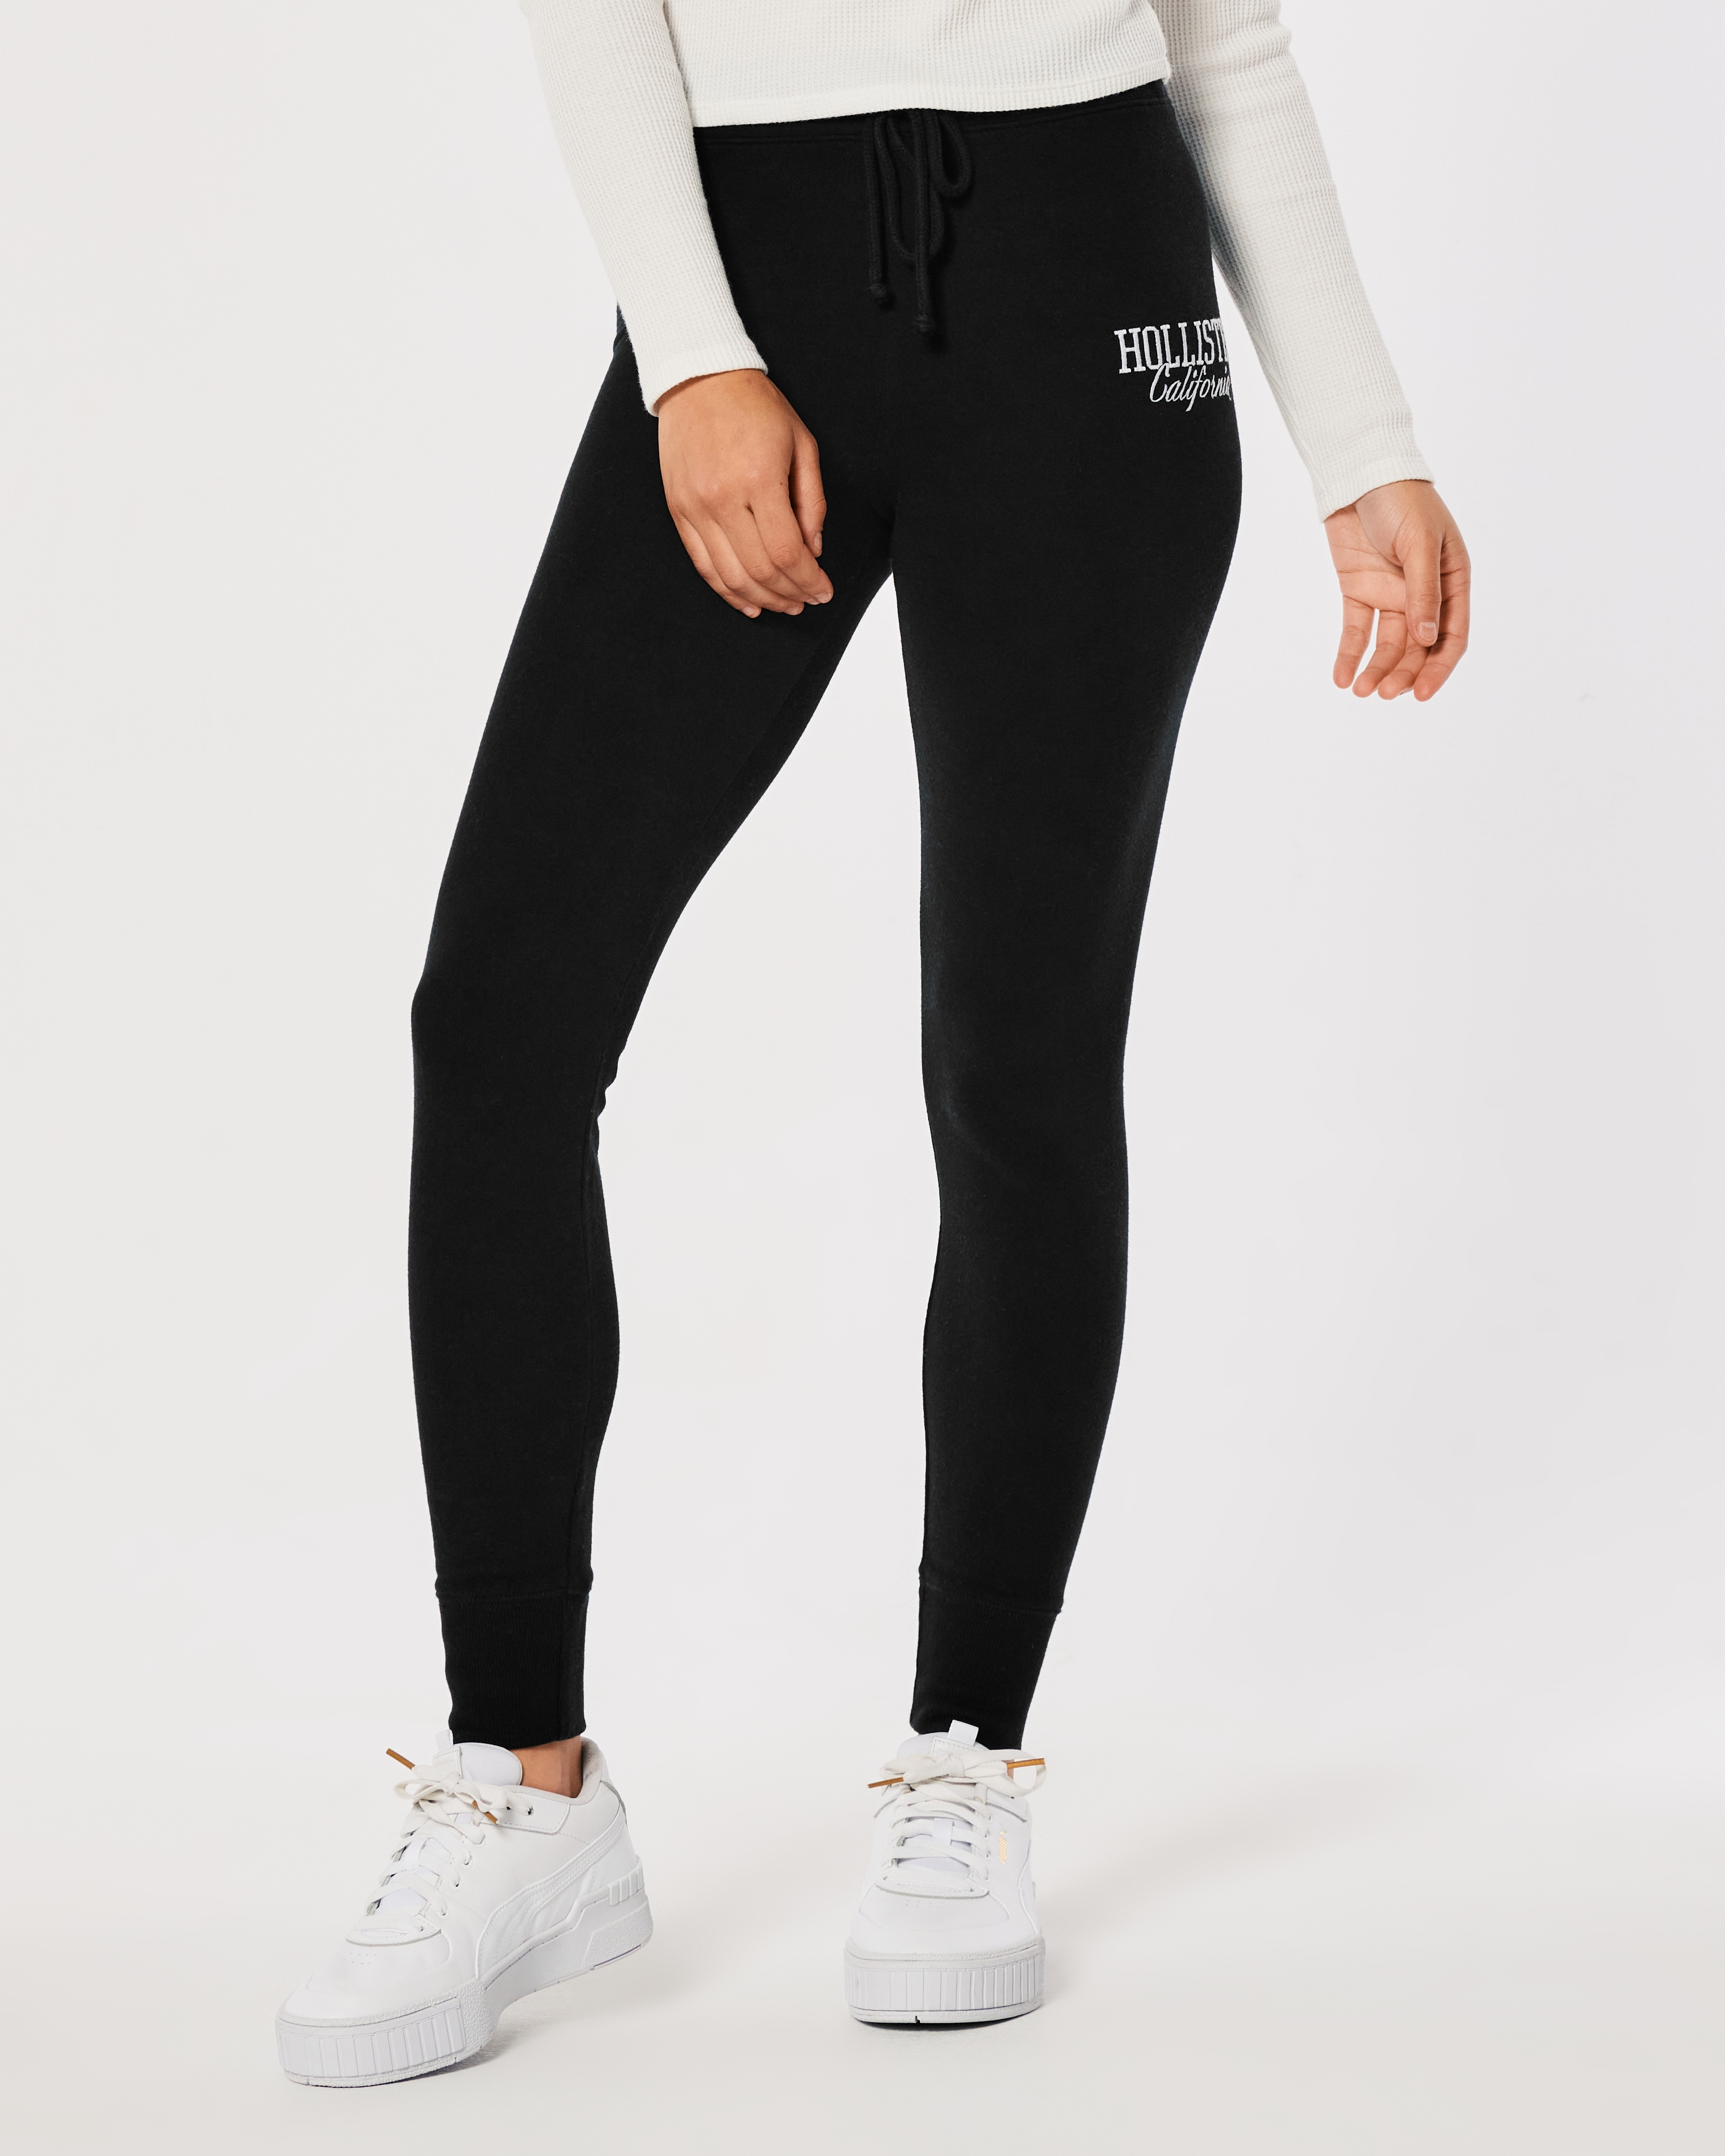 NWT HOLLISTER Ultra High-Rise Black Jersey Leggings New Side Graphic  Stretch S